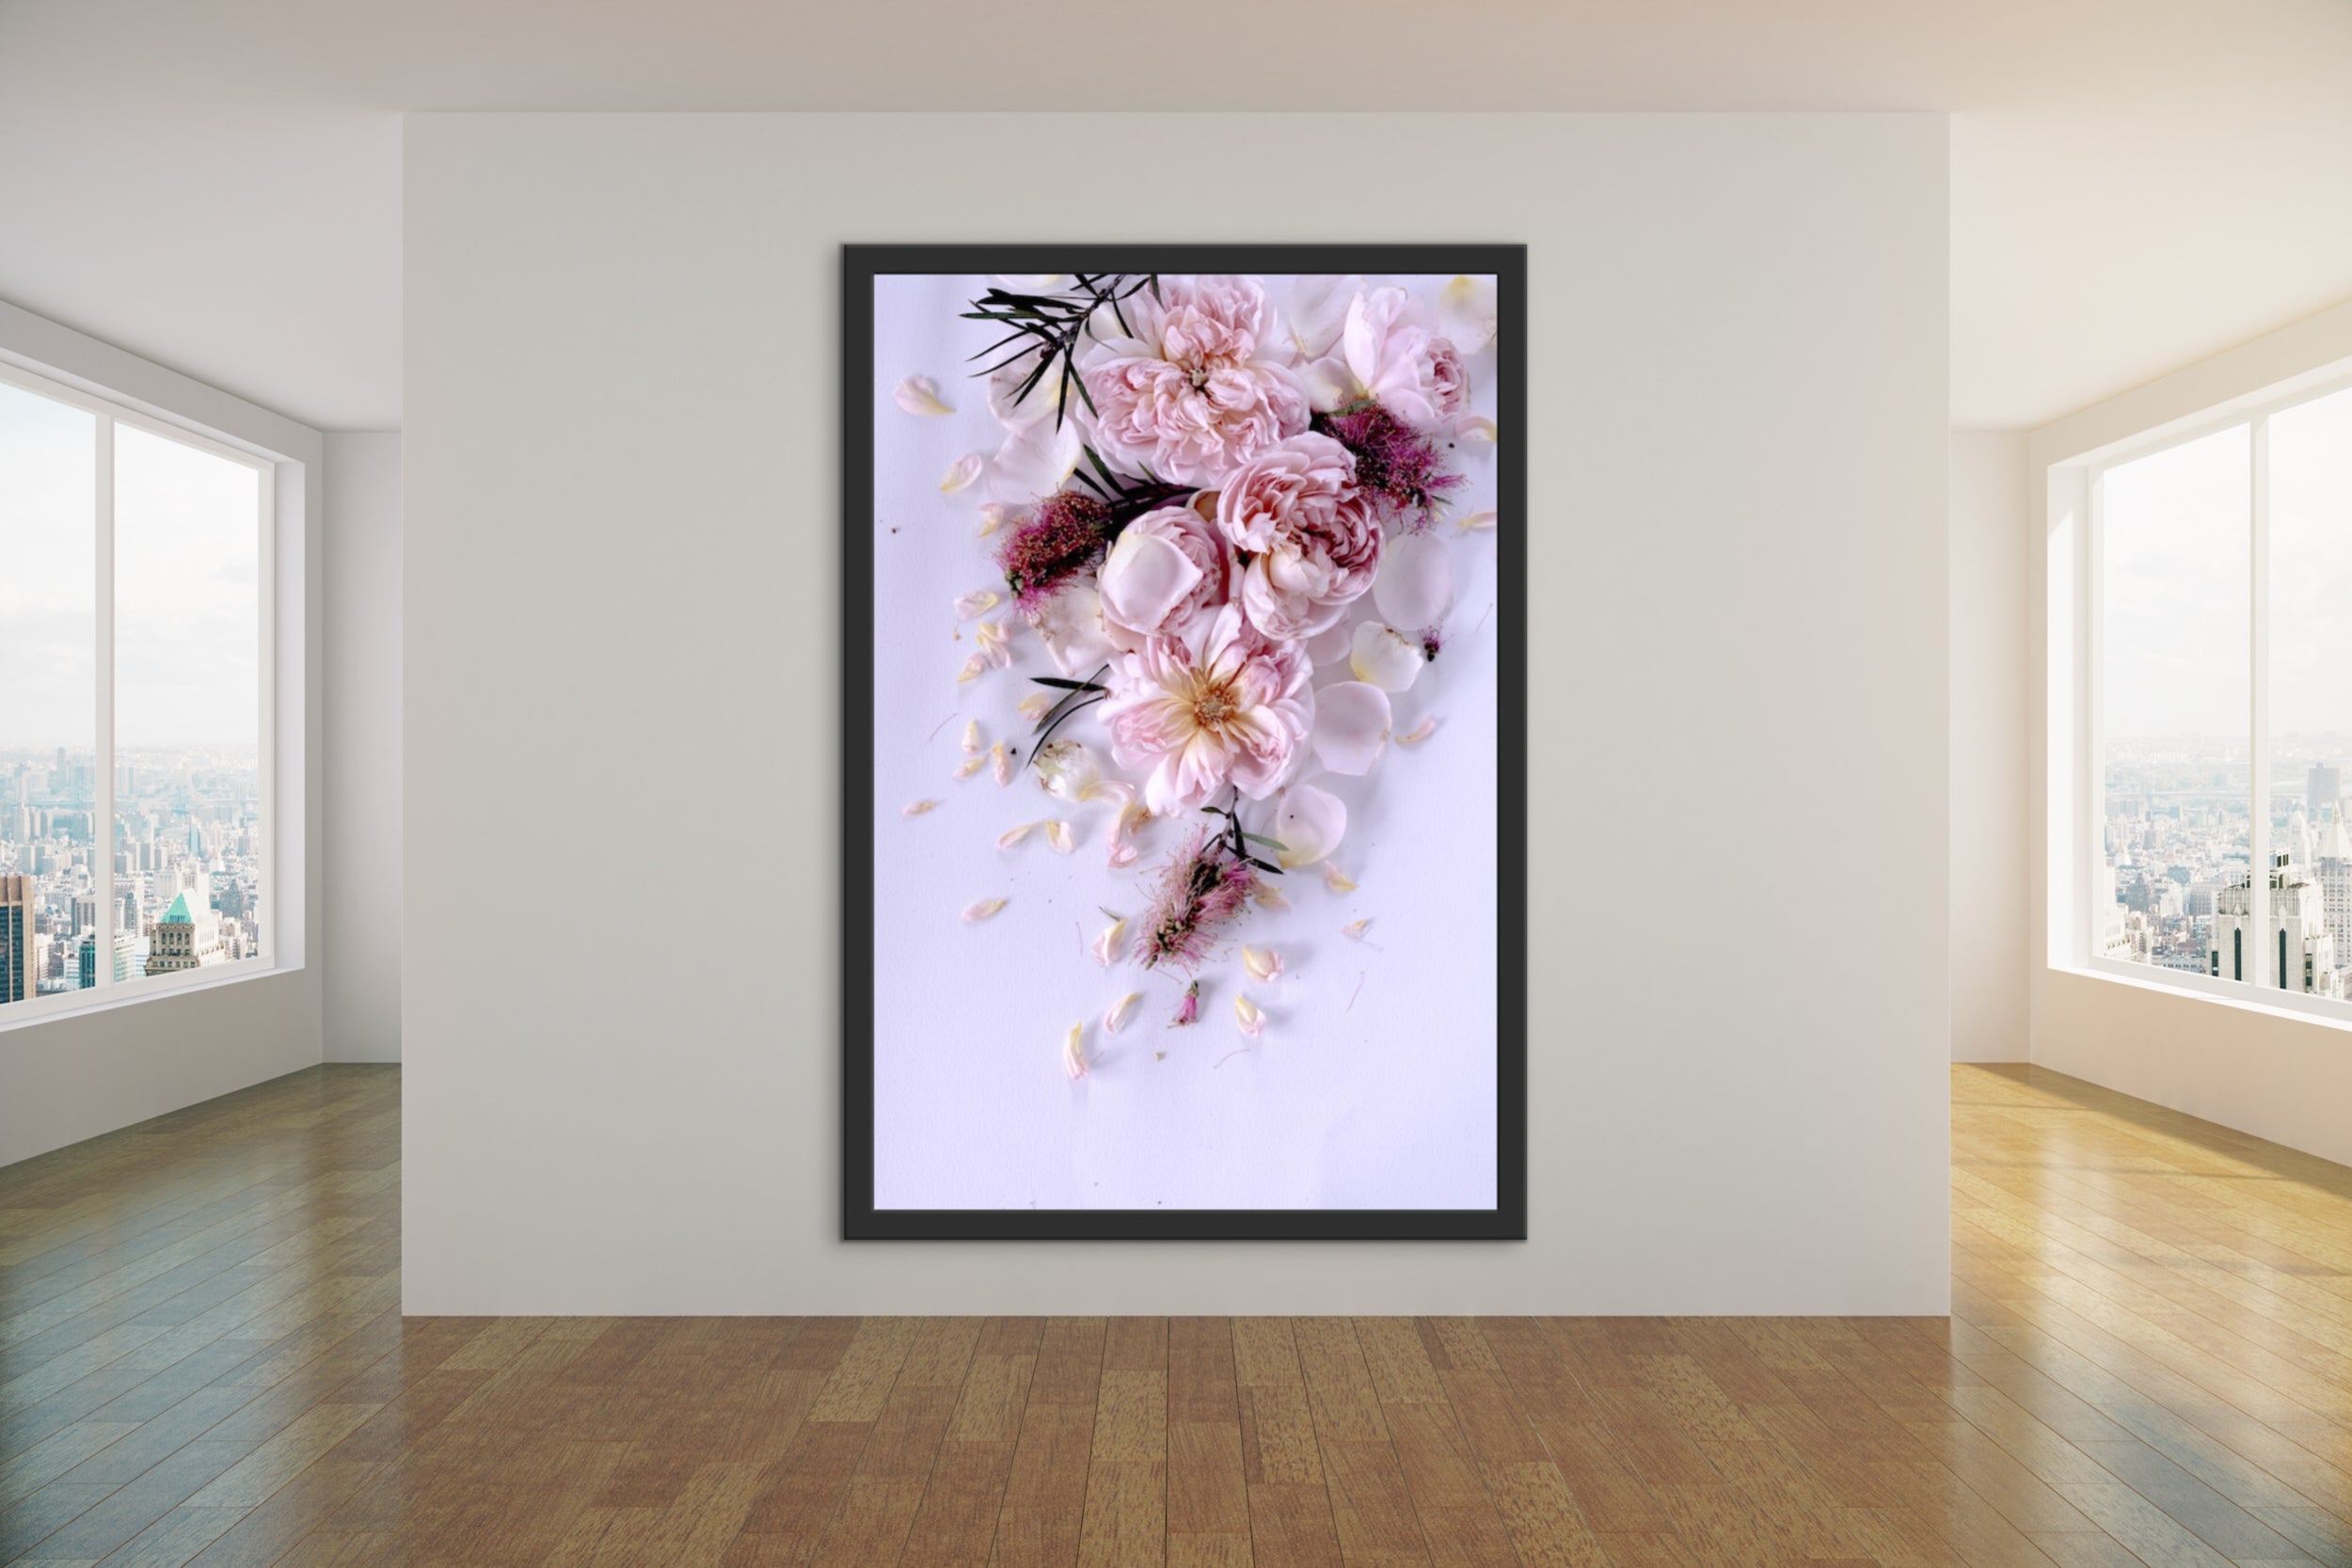 Abstract Floral. Purple. Flower Power Serenade. Art Print. Antuanelle 2 Soft Pastel Floral Artwork. Limited Edition Print